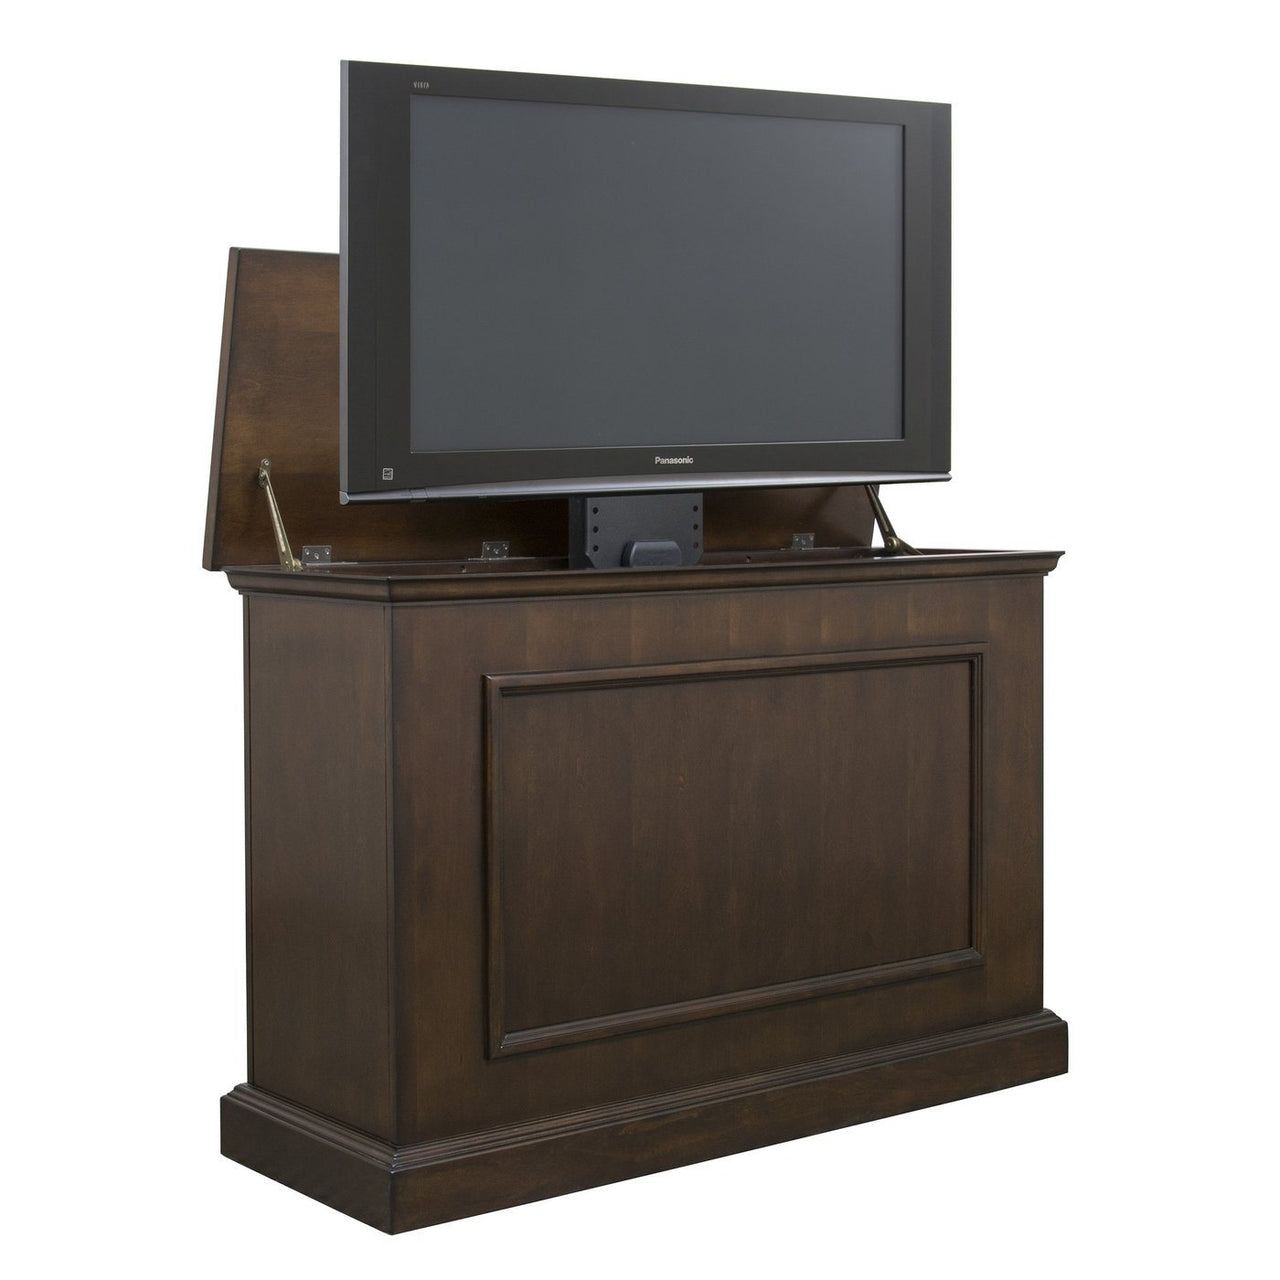 Touchstone Elevate Mini 75008- Espresso Lift Cabinets For Up To 46” Flat Screens Tv Lift Cabinets Touchstone 